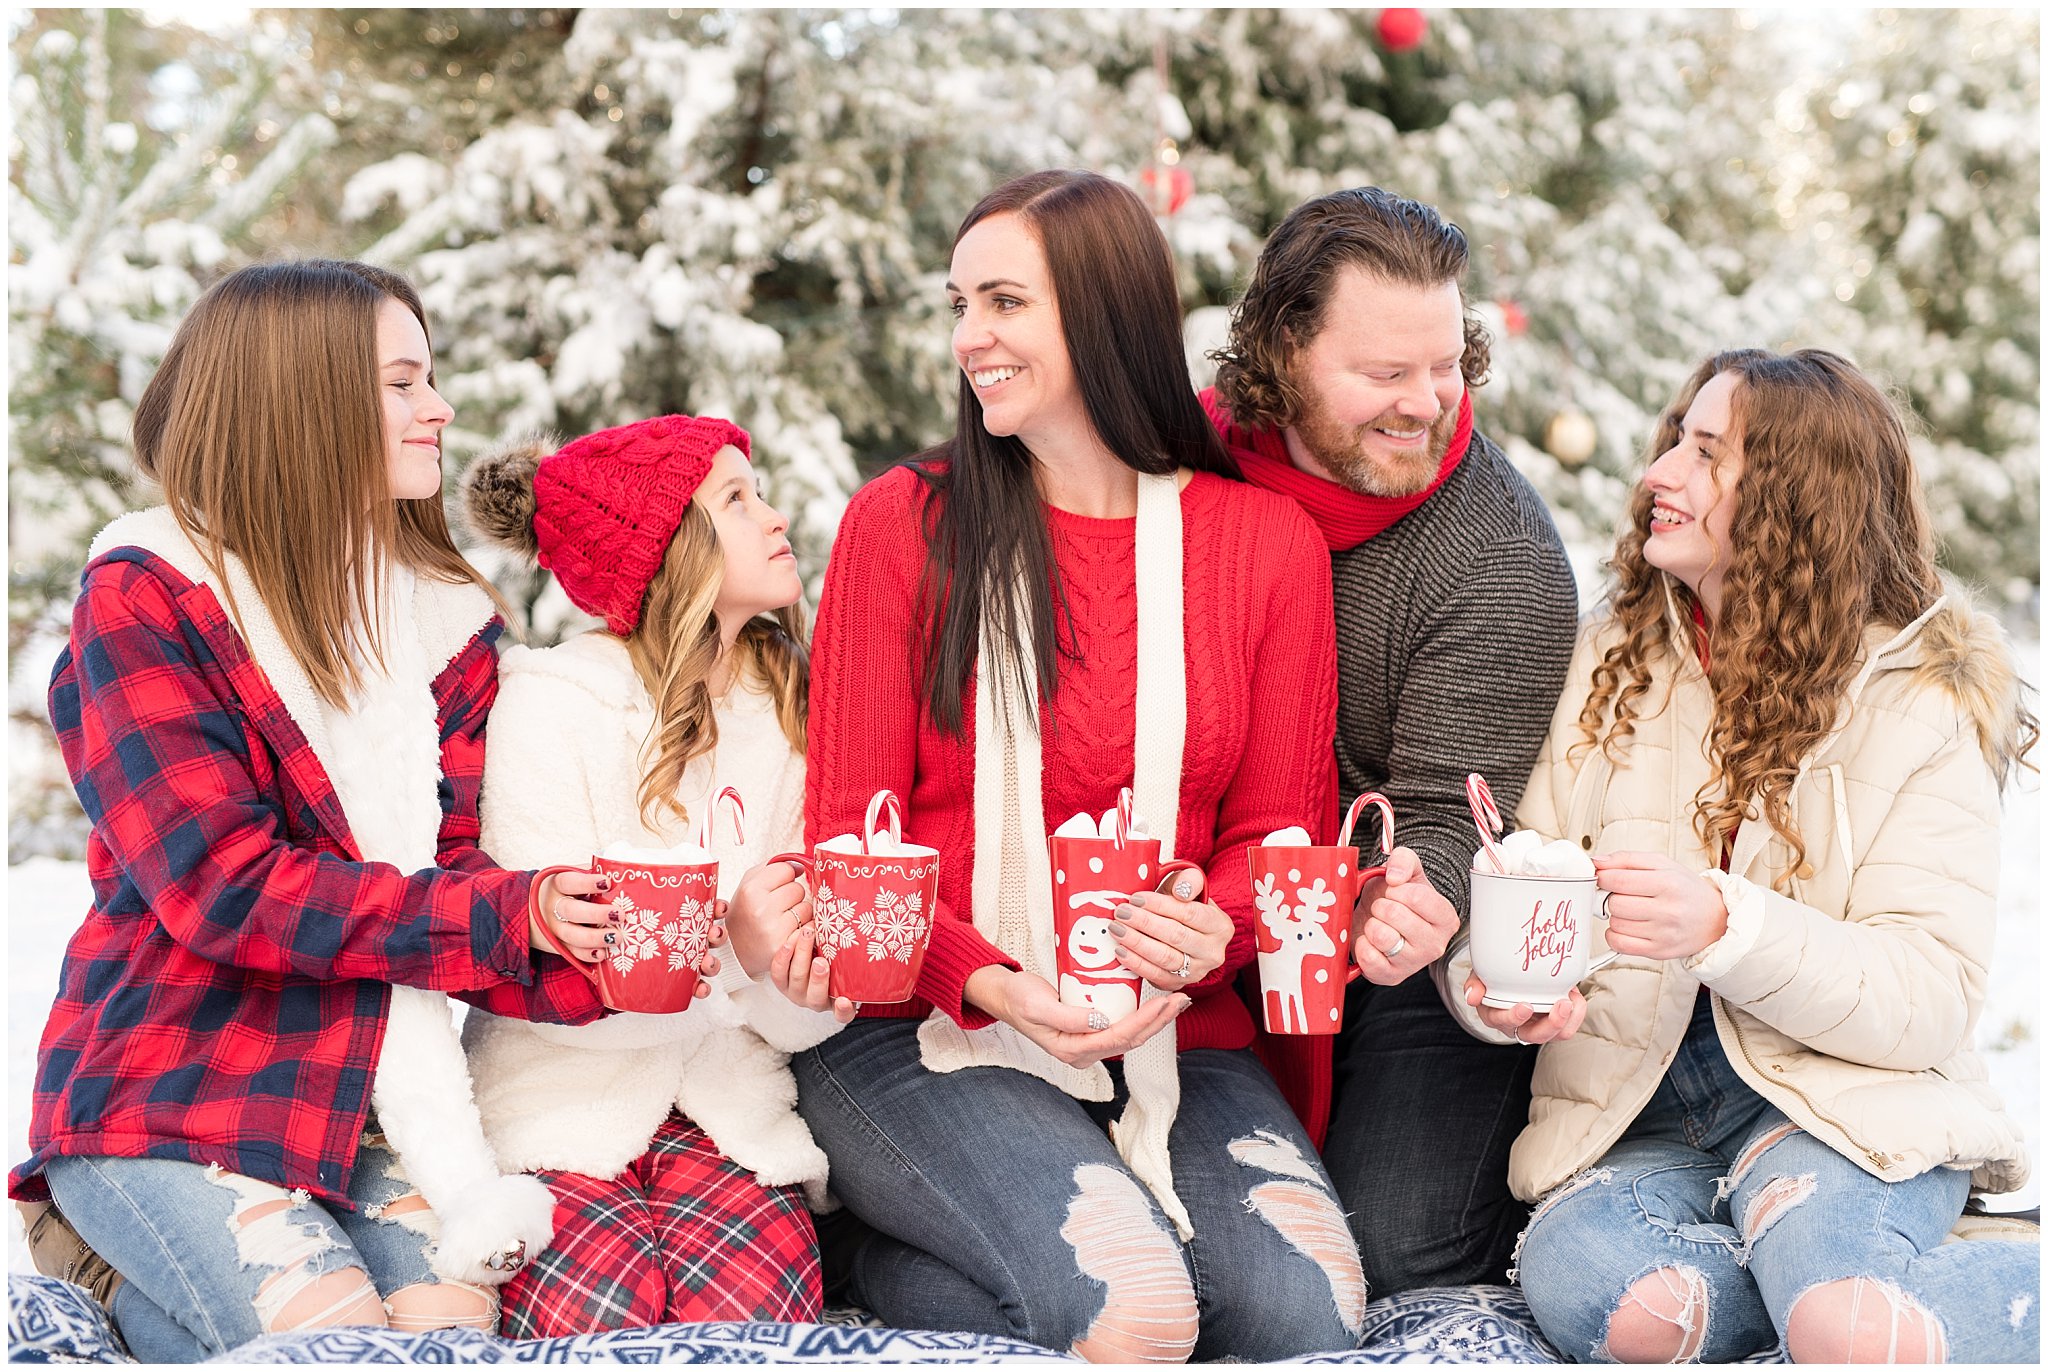 Family holding hot chocolate laughing at each other in front of Christmas trees | Utah Family Christmas Photoshoot | Oak Hills Reception and Event | Jessie and Dallin Photography